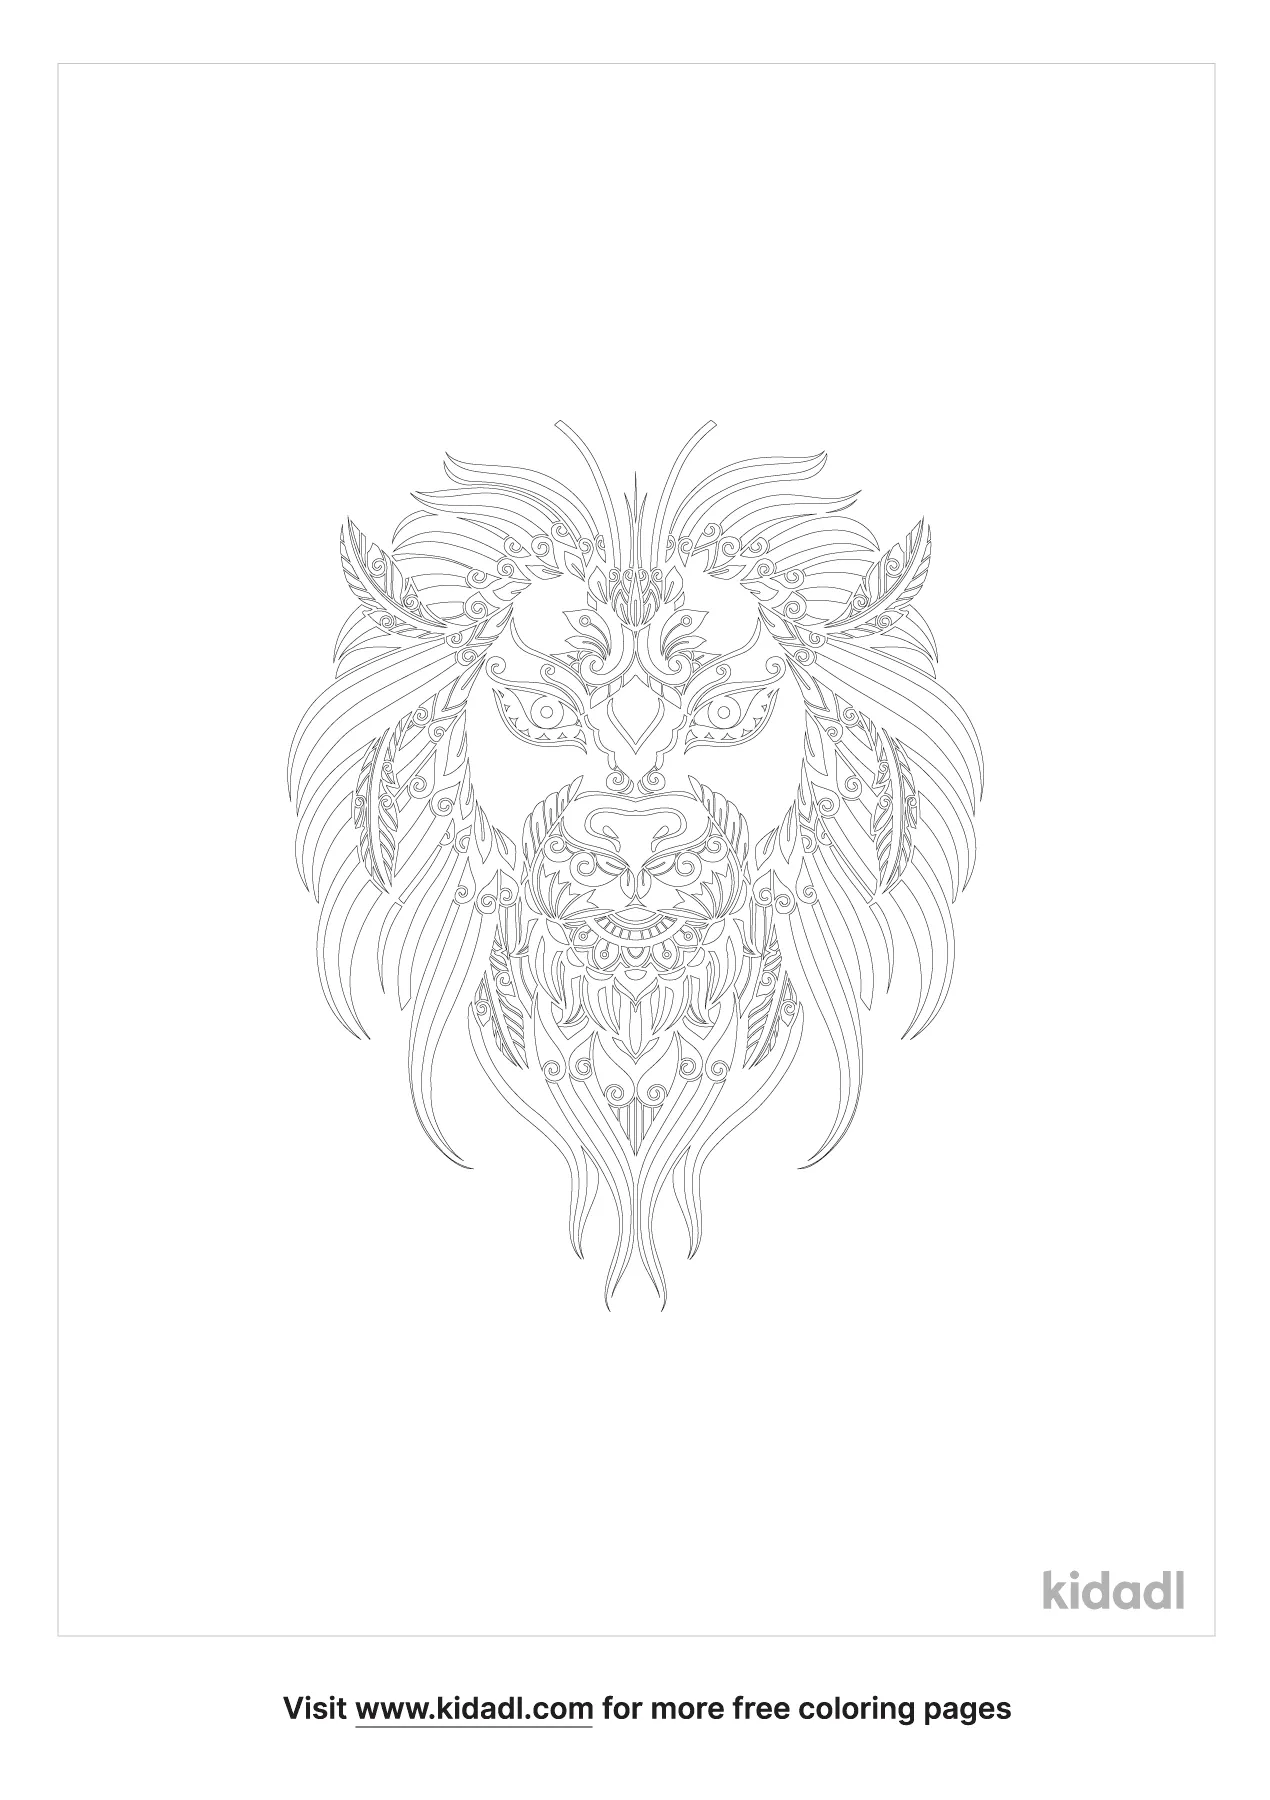 Free Abstract Animals Coloring Page | Coloring Page Printables | Kidadl